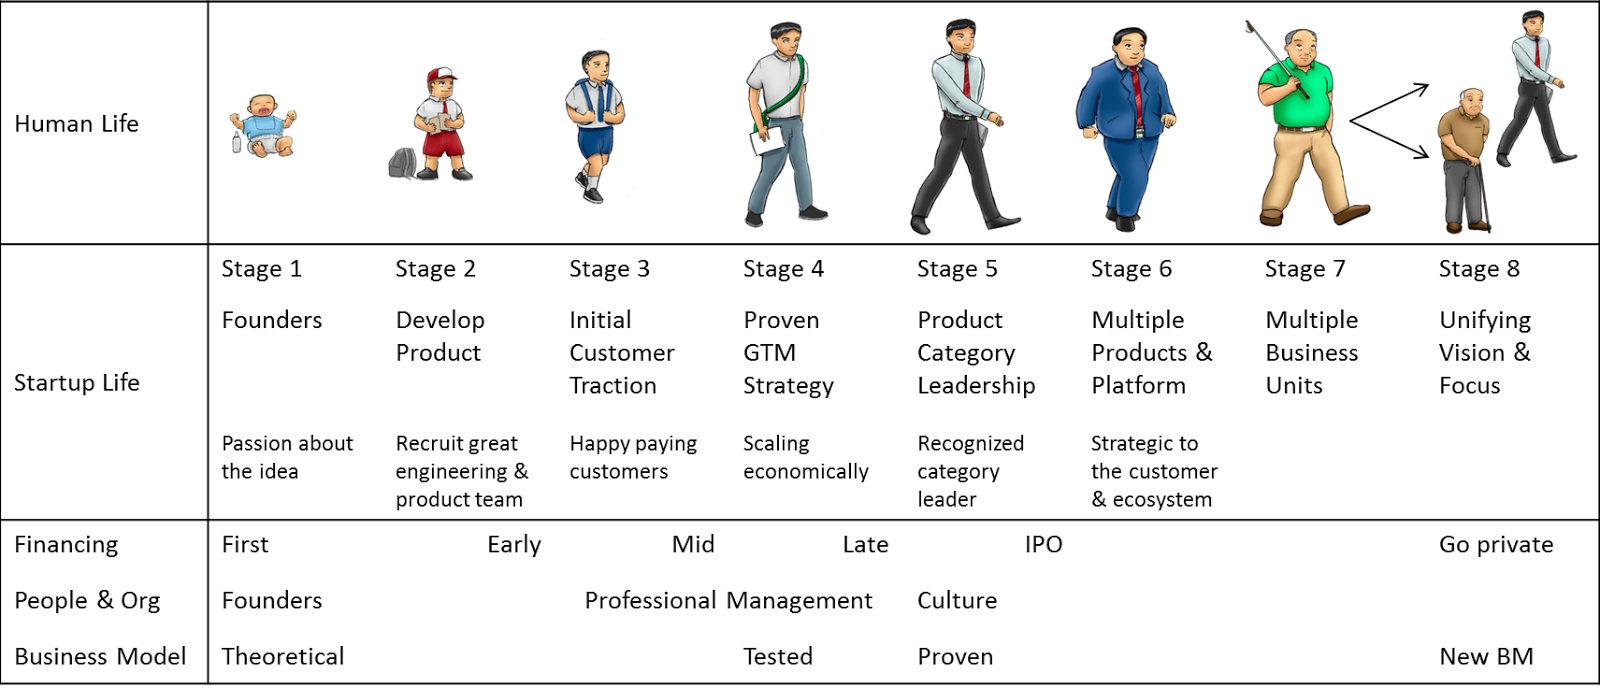 Life period. Stages of Life. Ages and Stages of Life. Different Stages of Life. Stages of Human Life.